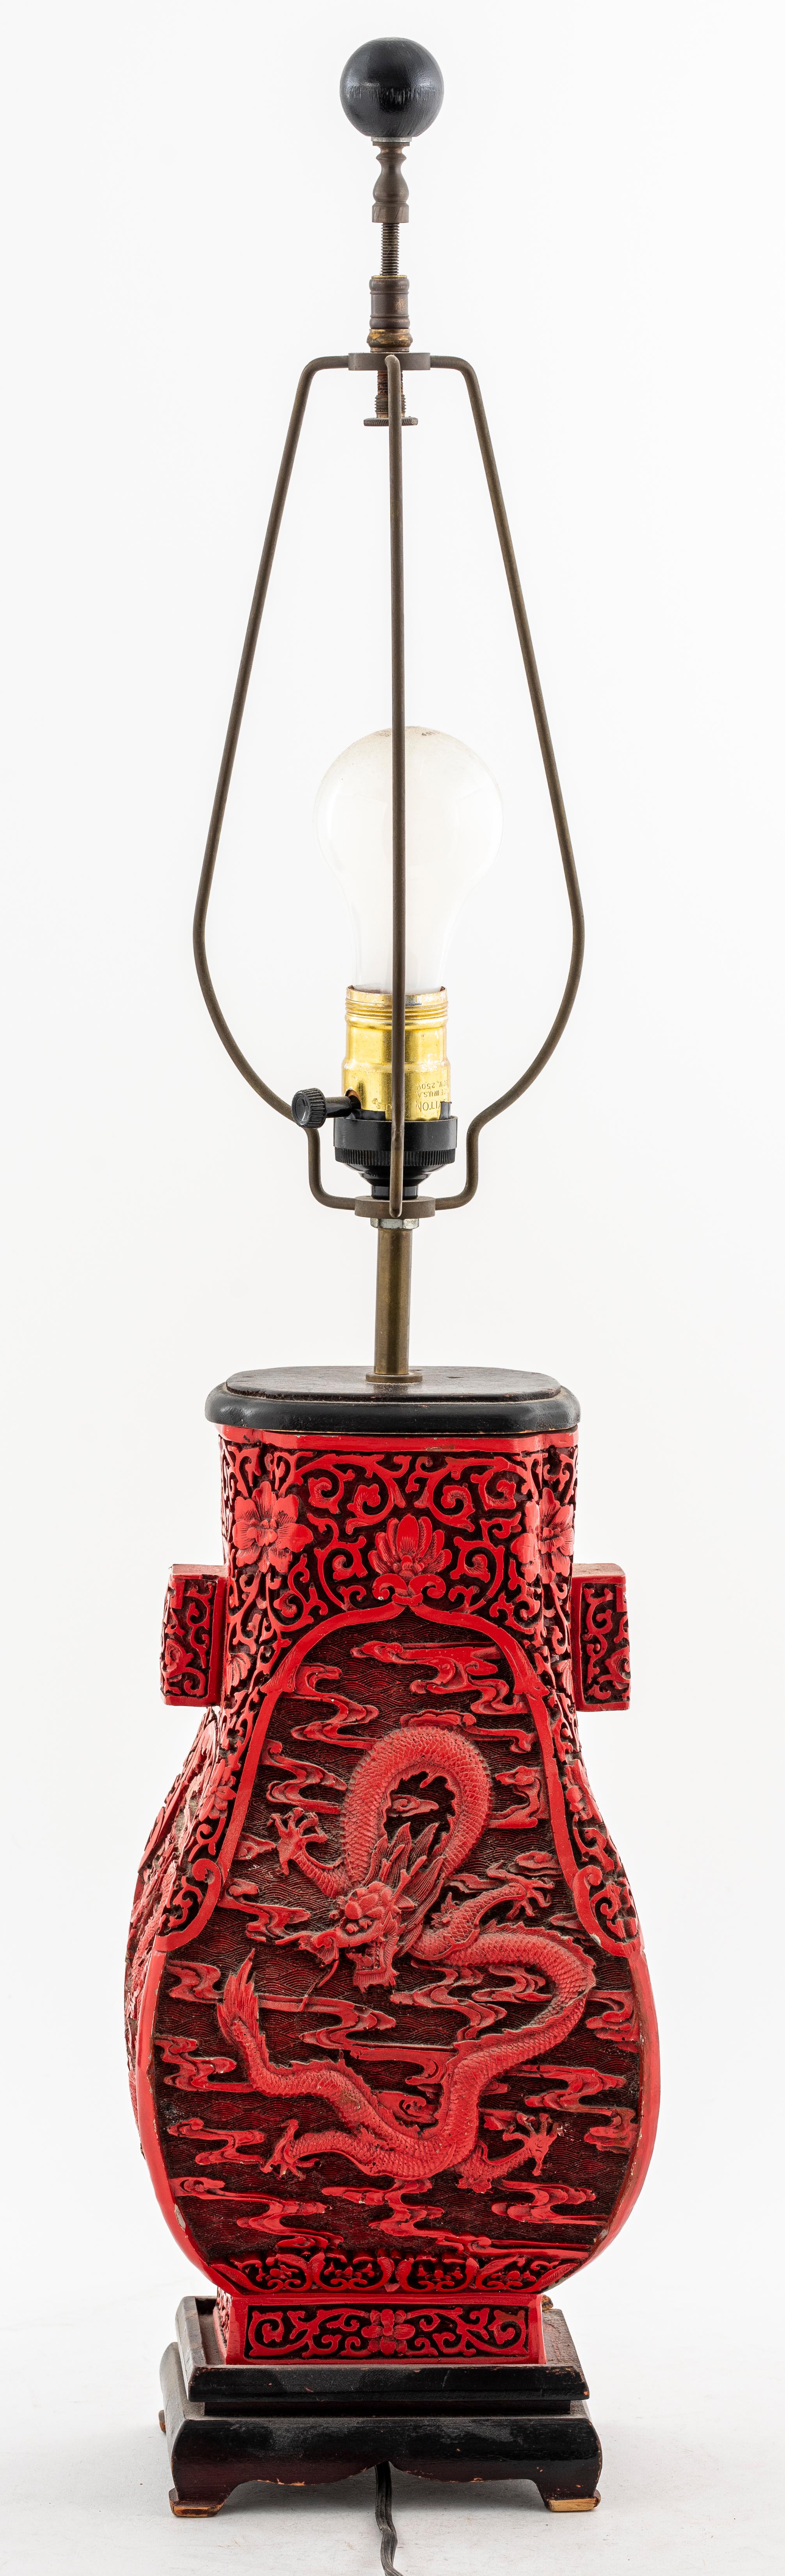 20th Century Chinese Cinnabar Lamp with Dragon Motif For Sale